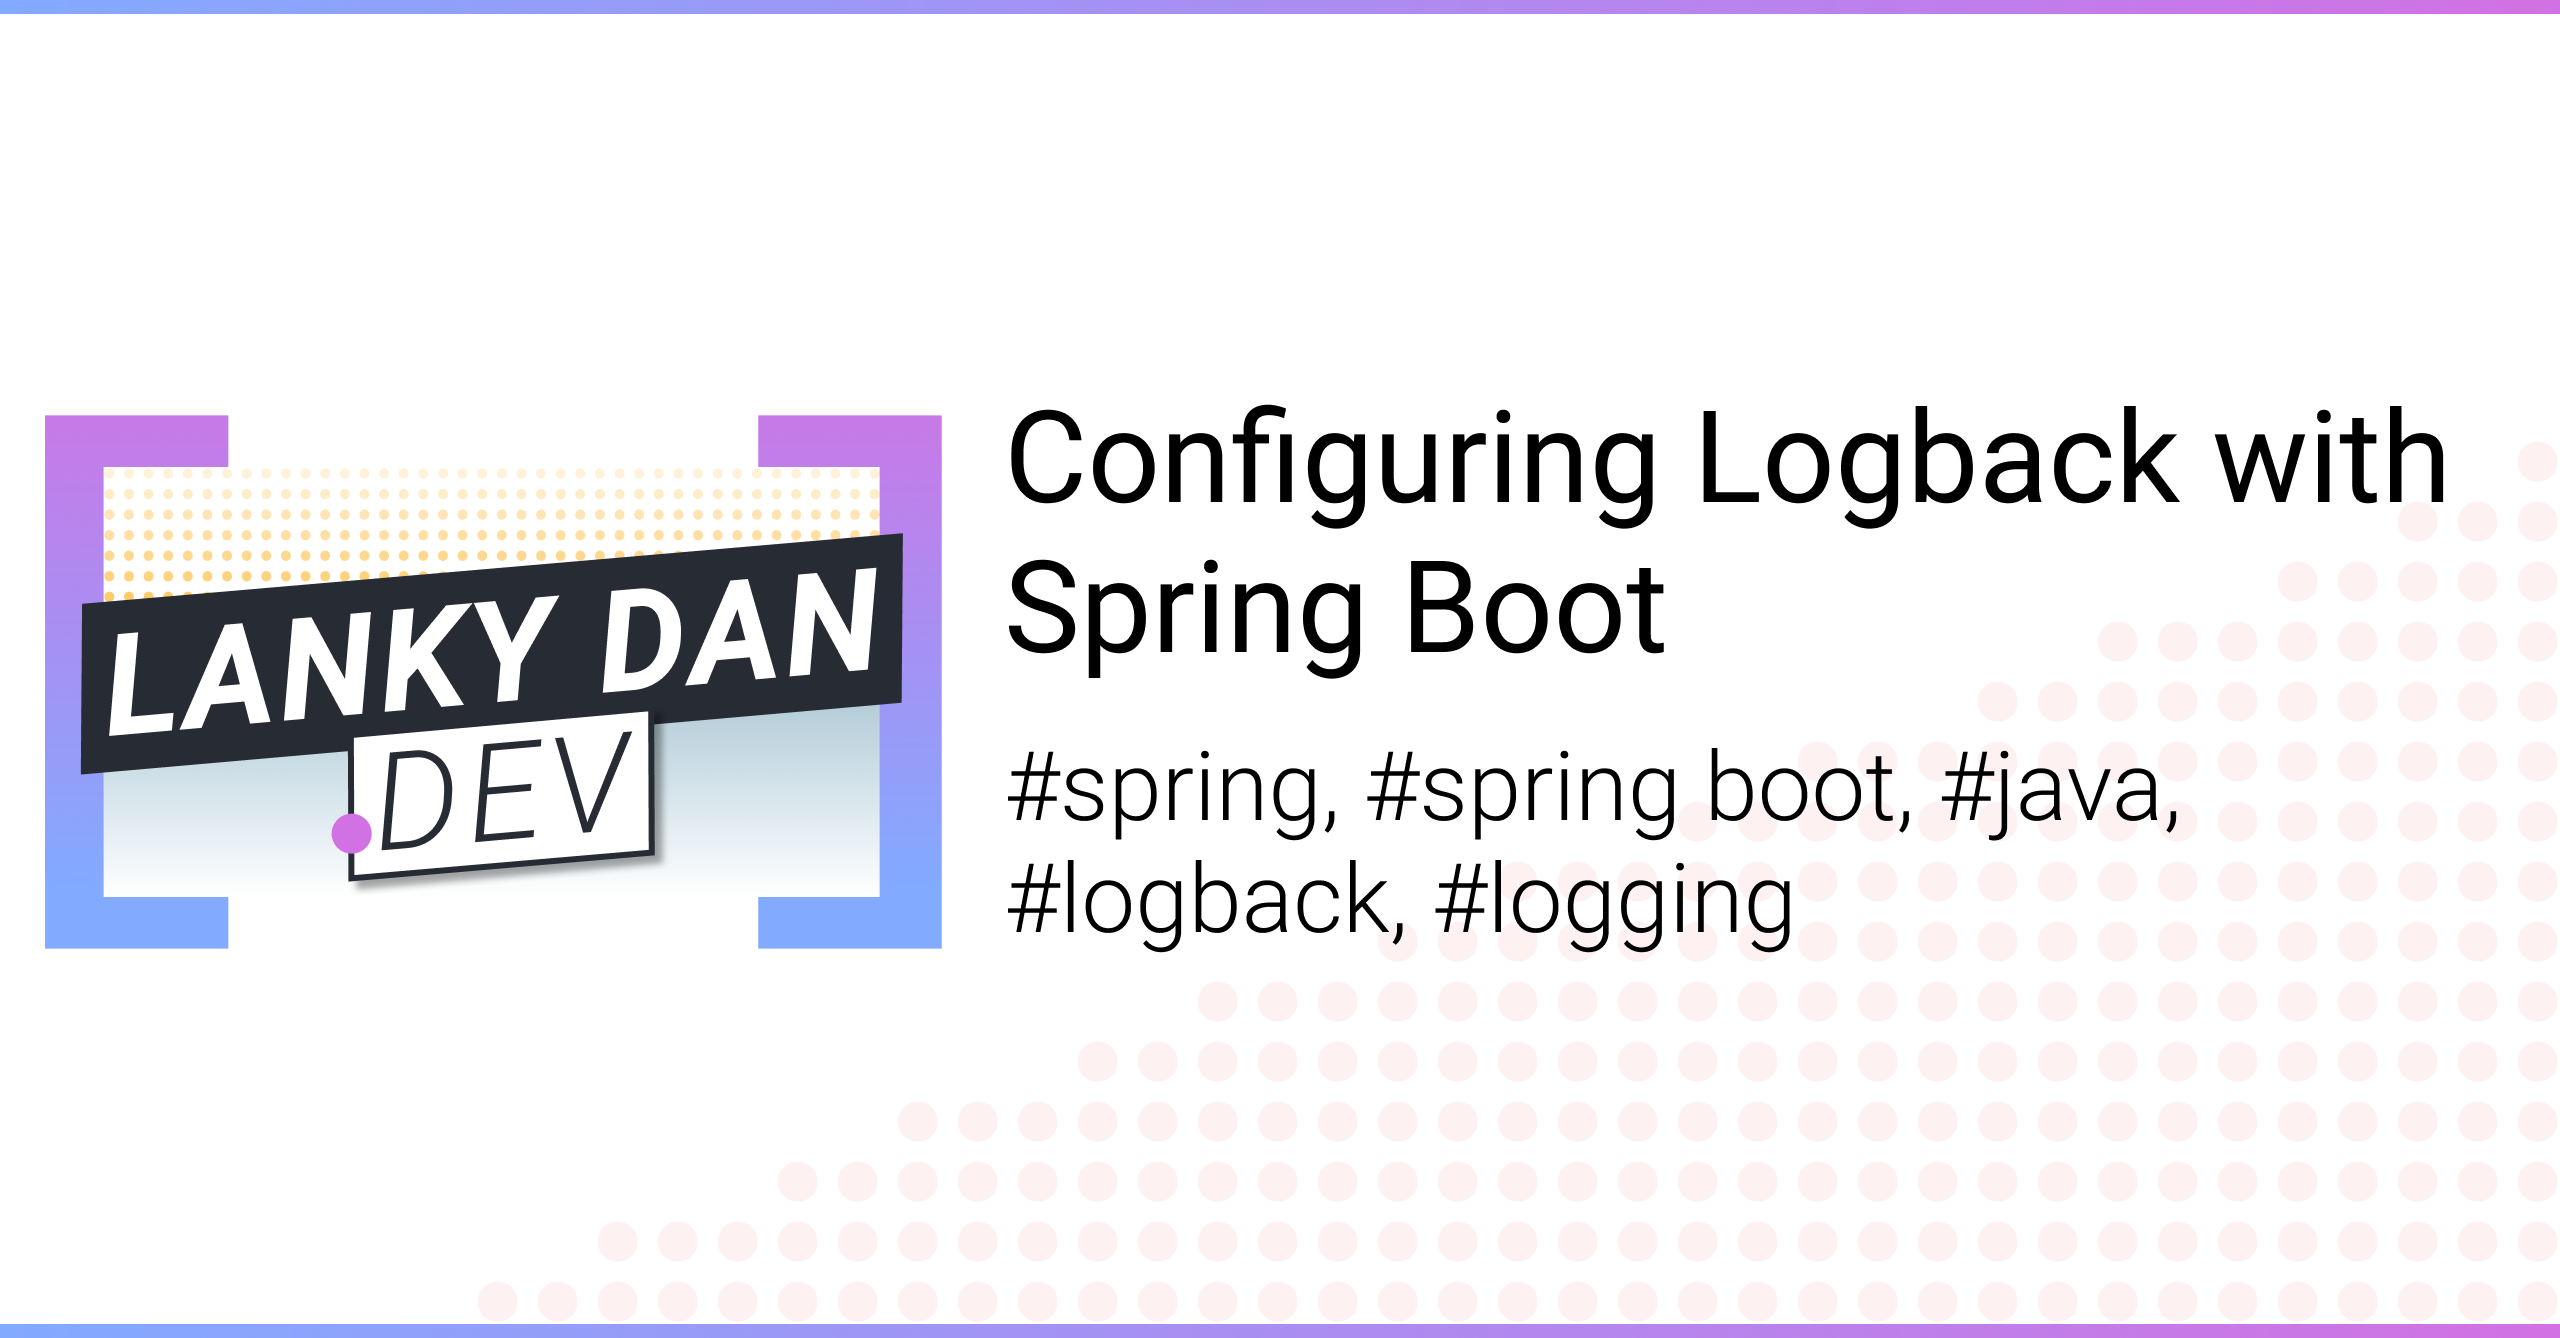 Configuring Logback with Spring Boot   Lanky Dan Blog